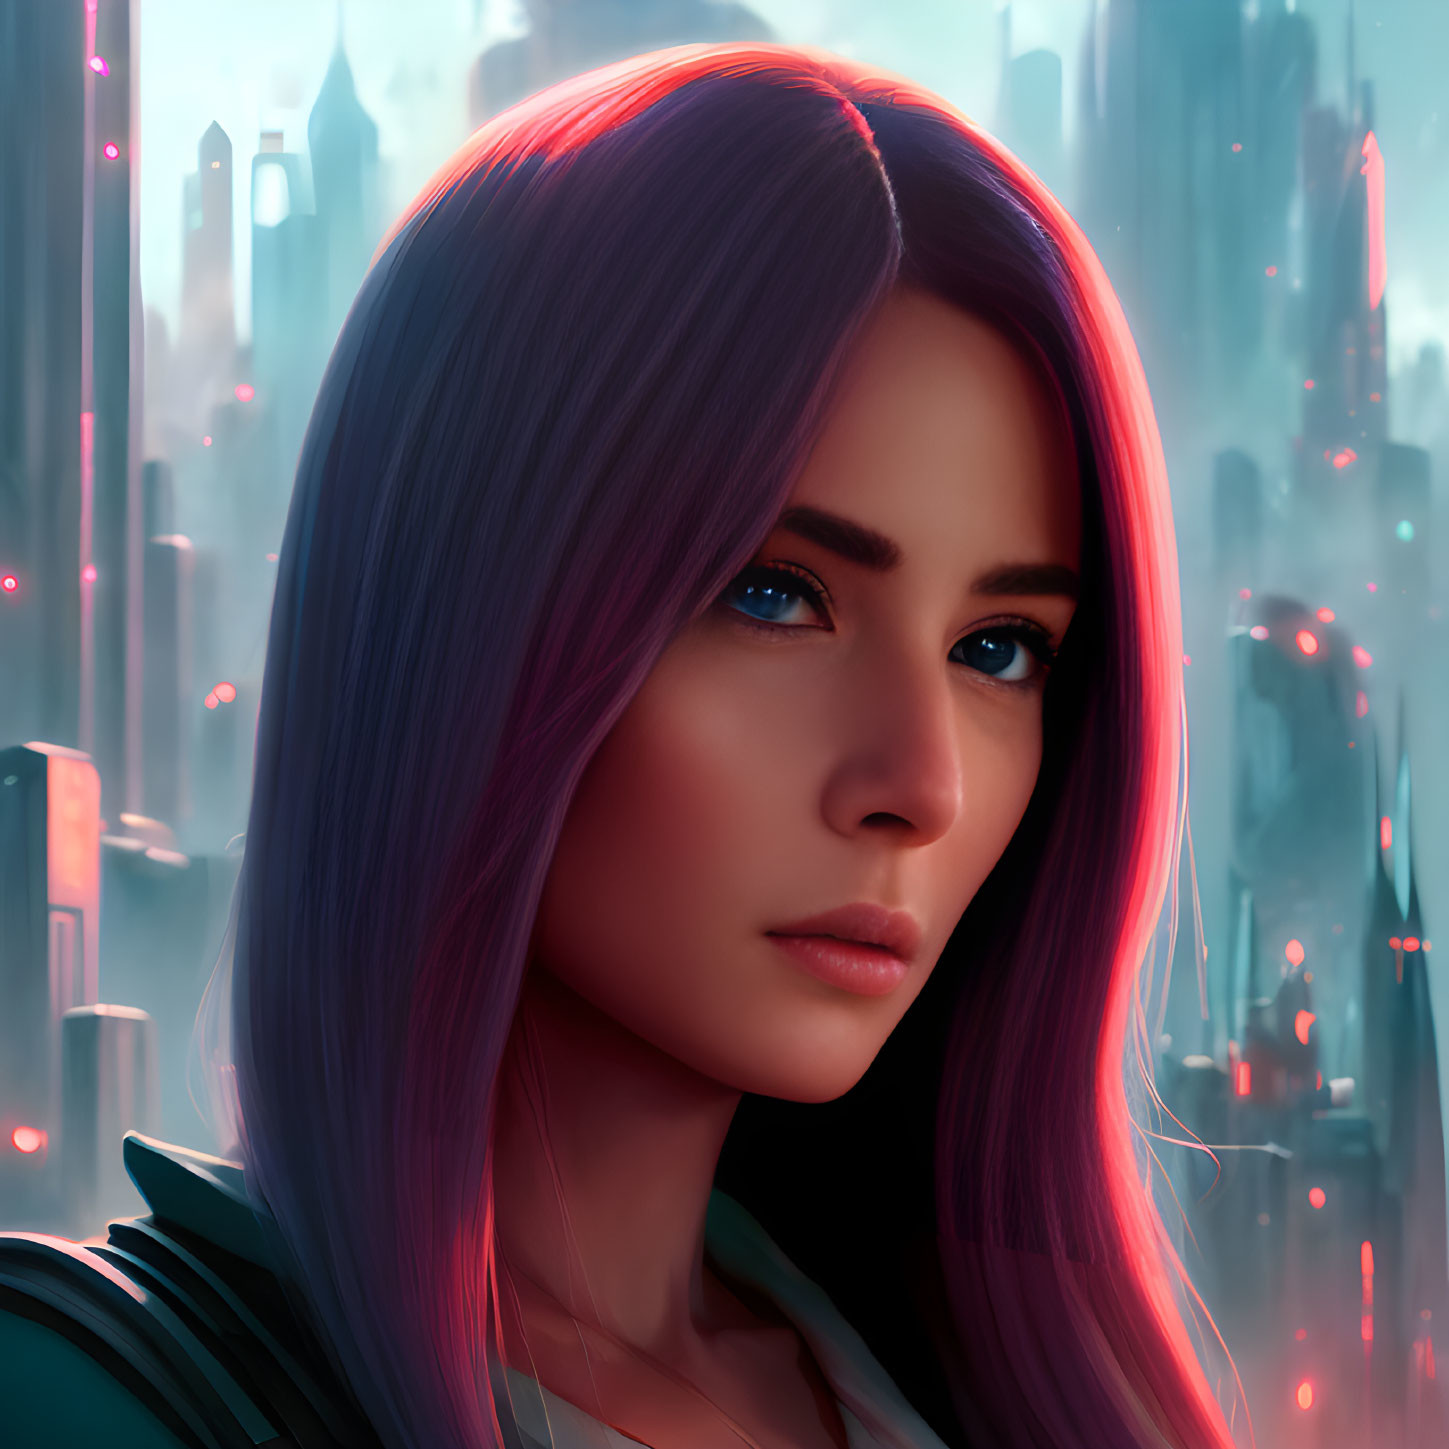 Digital artwork: Woman with purple hair and blue eyes in futuristic cityscape.